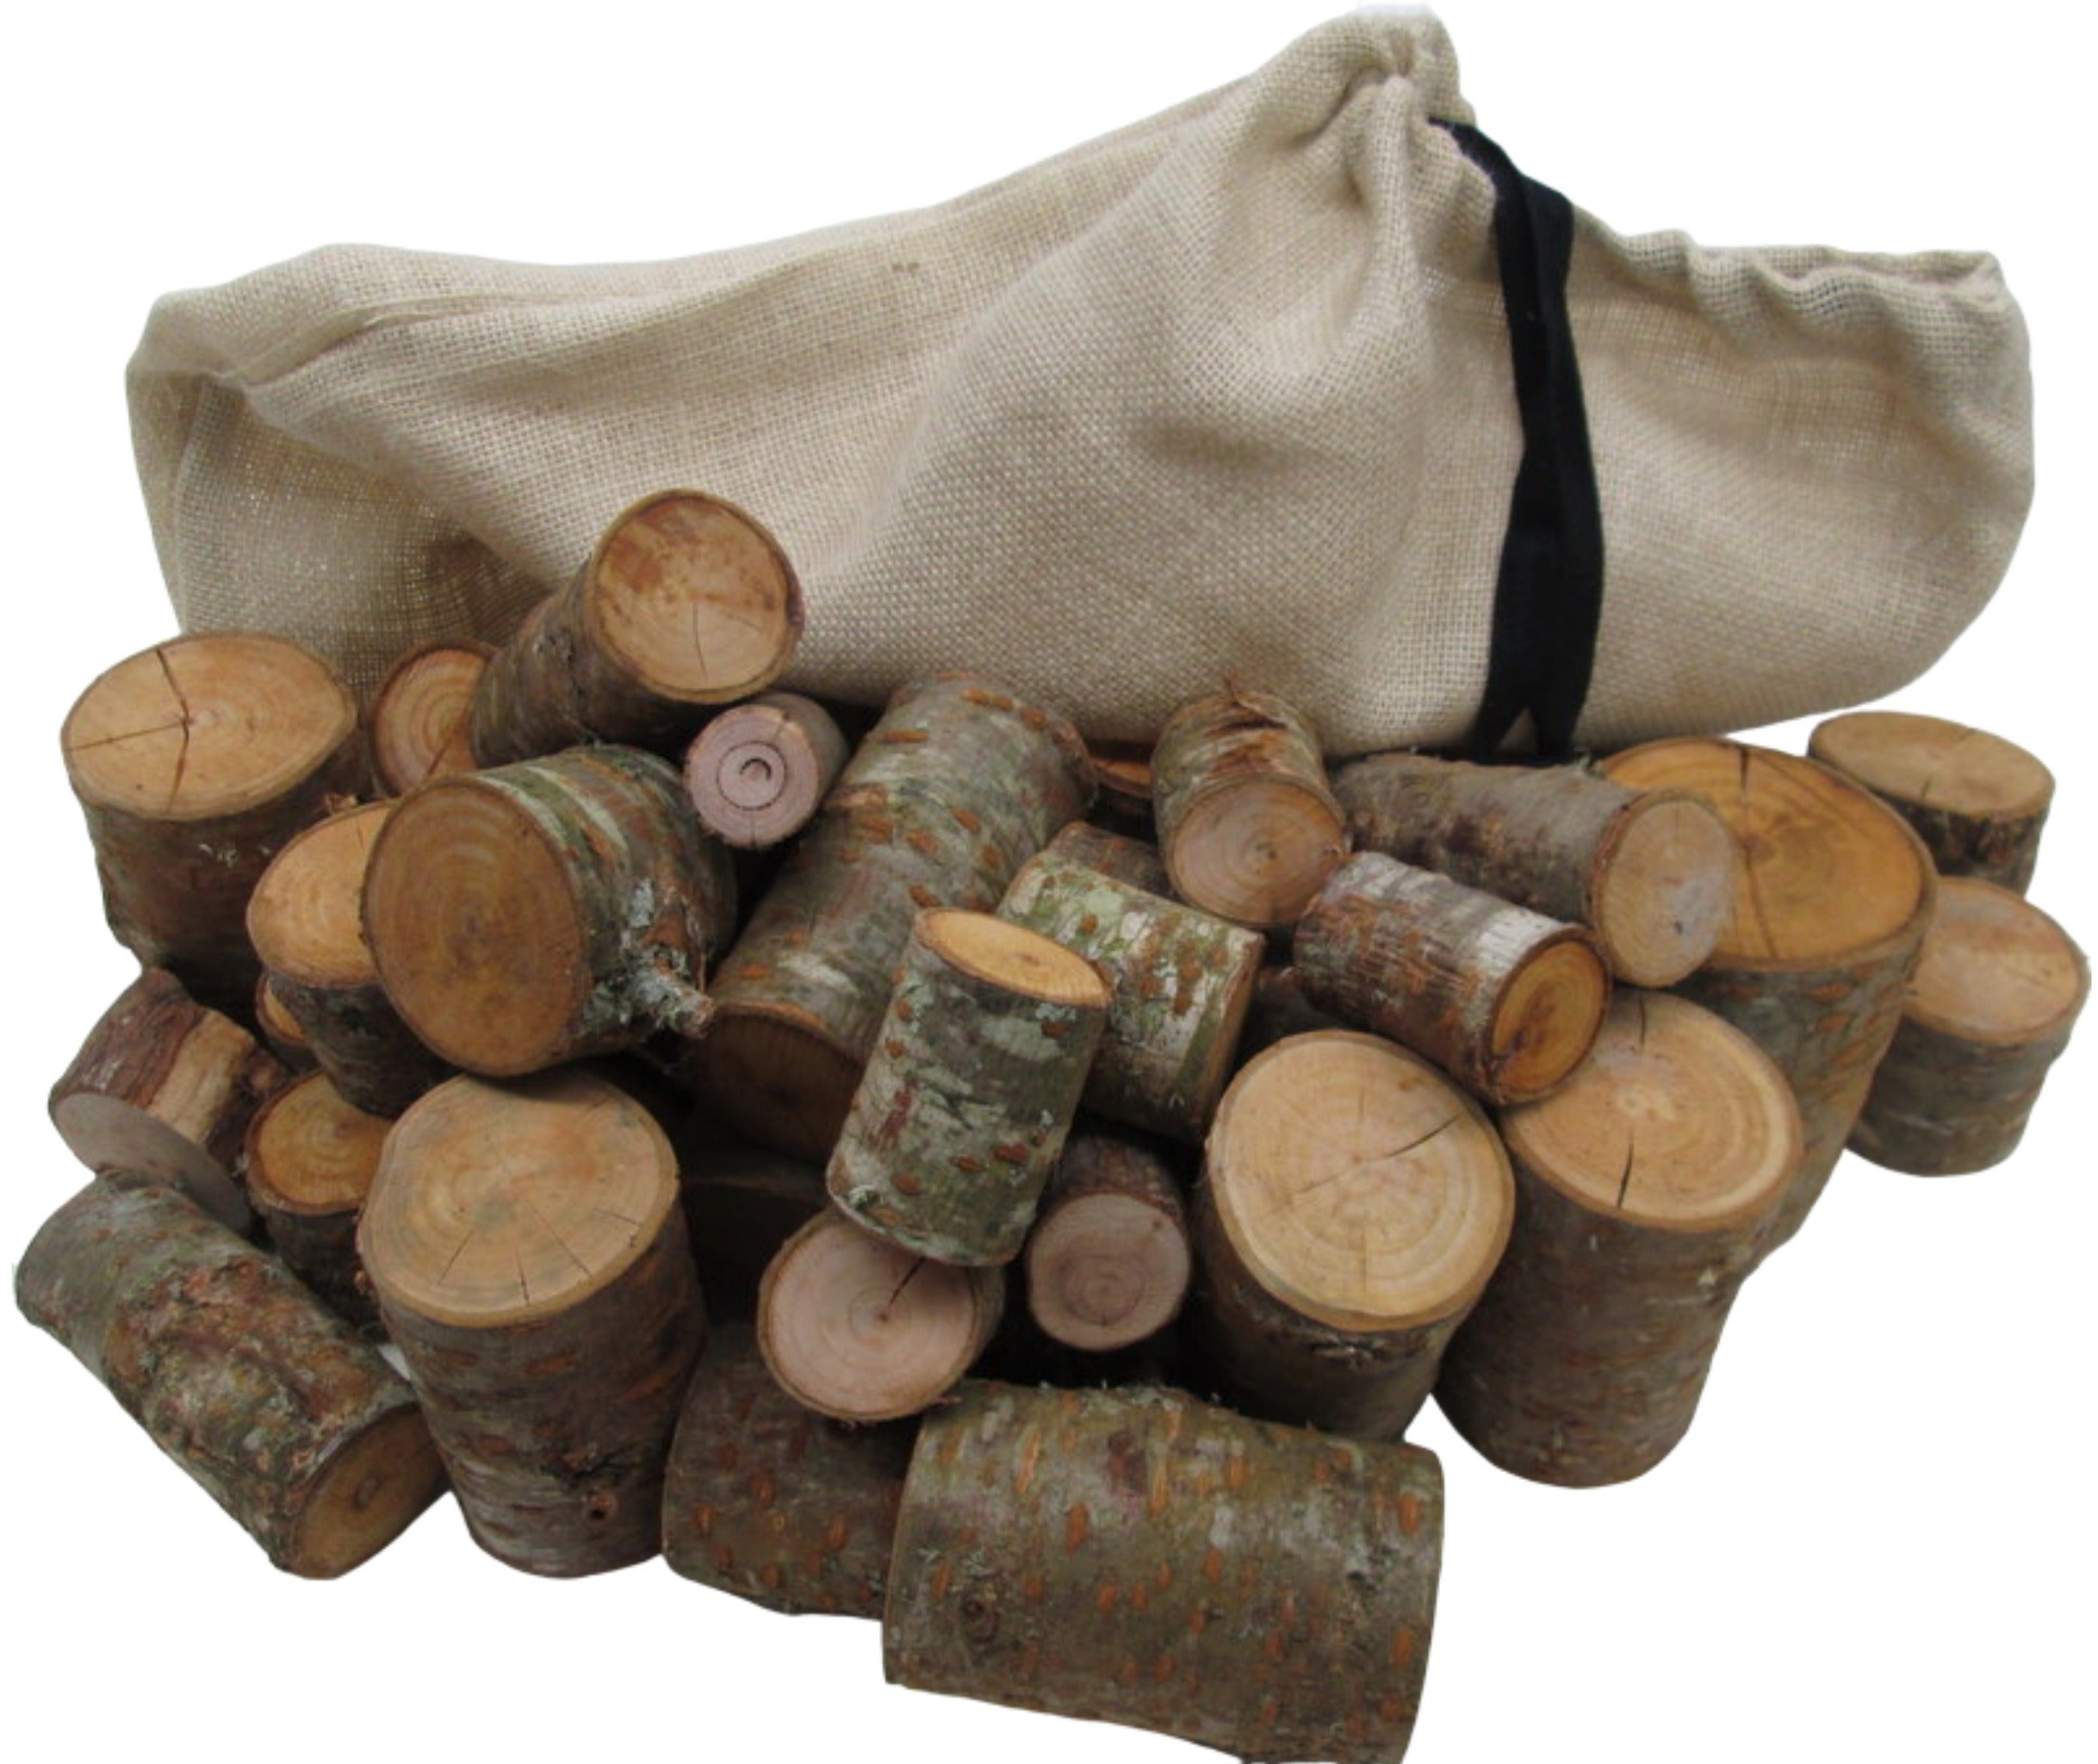 Natural wood stacking blocks for heuristic play